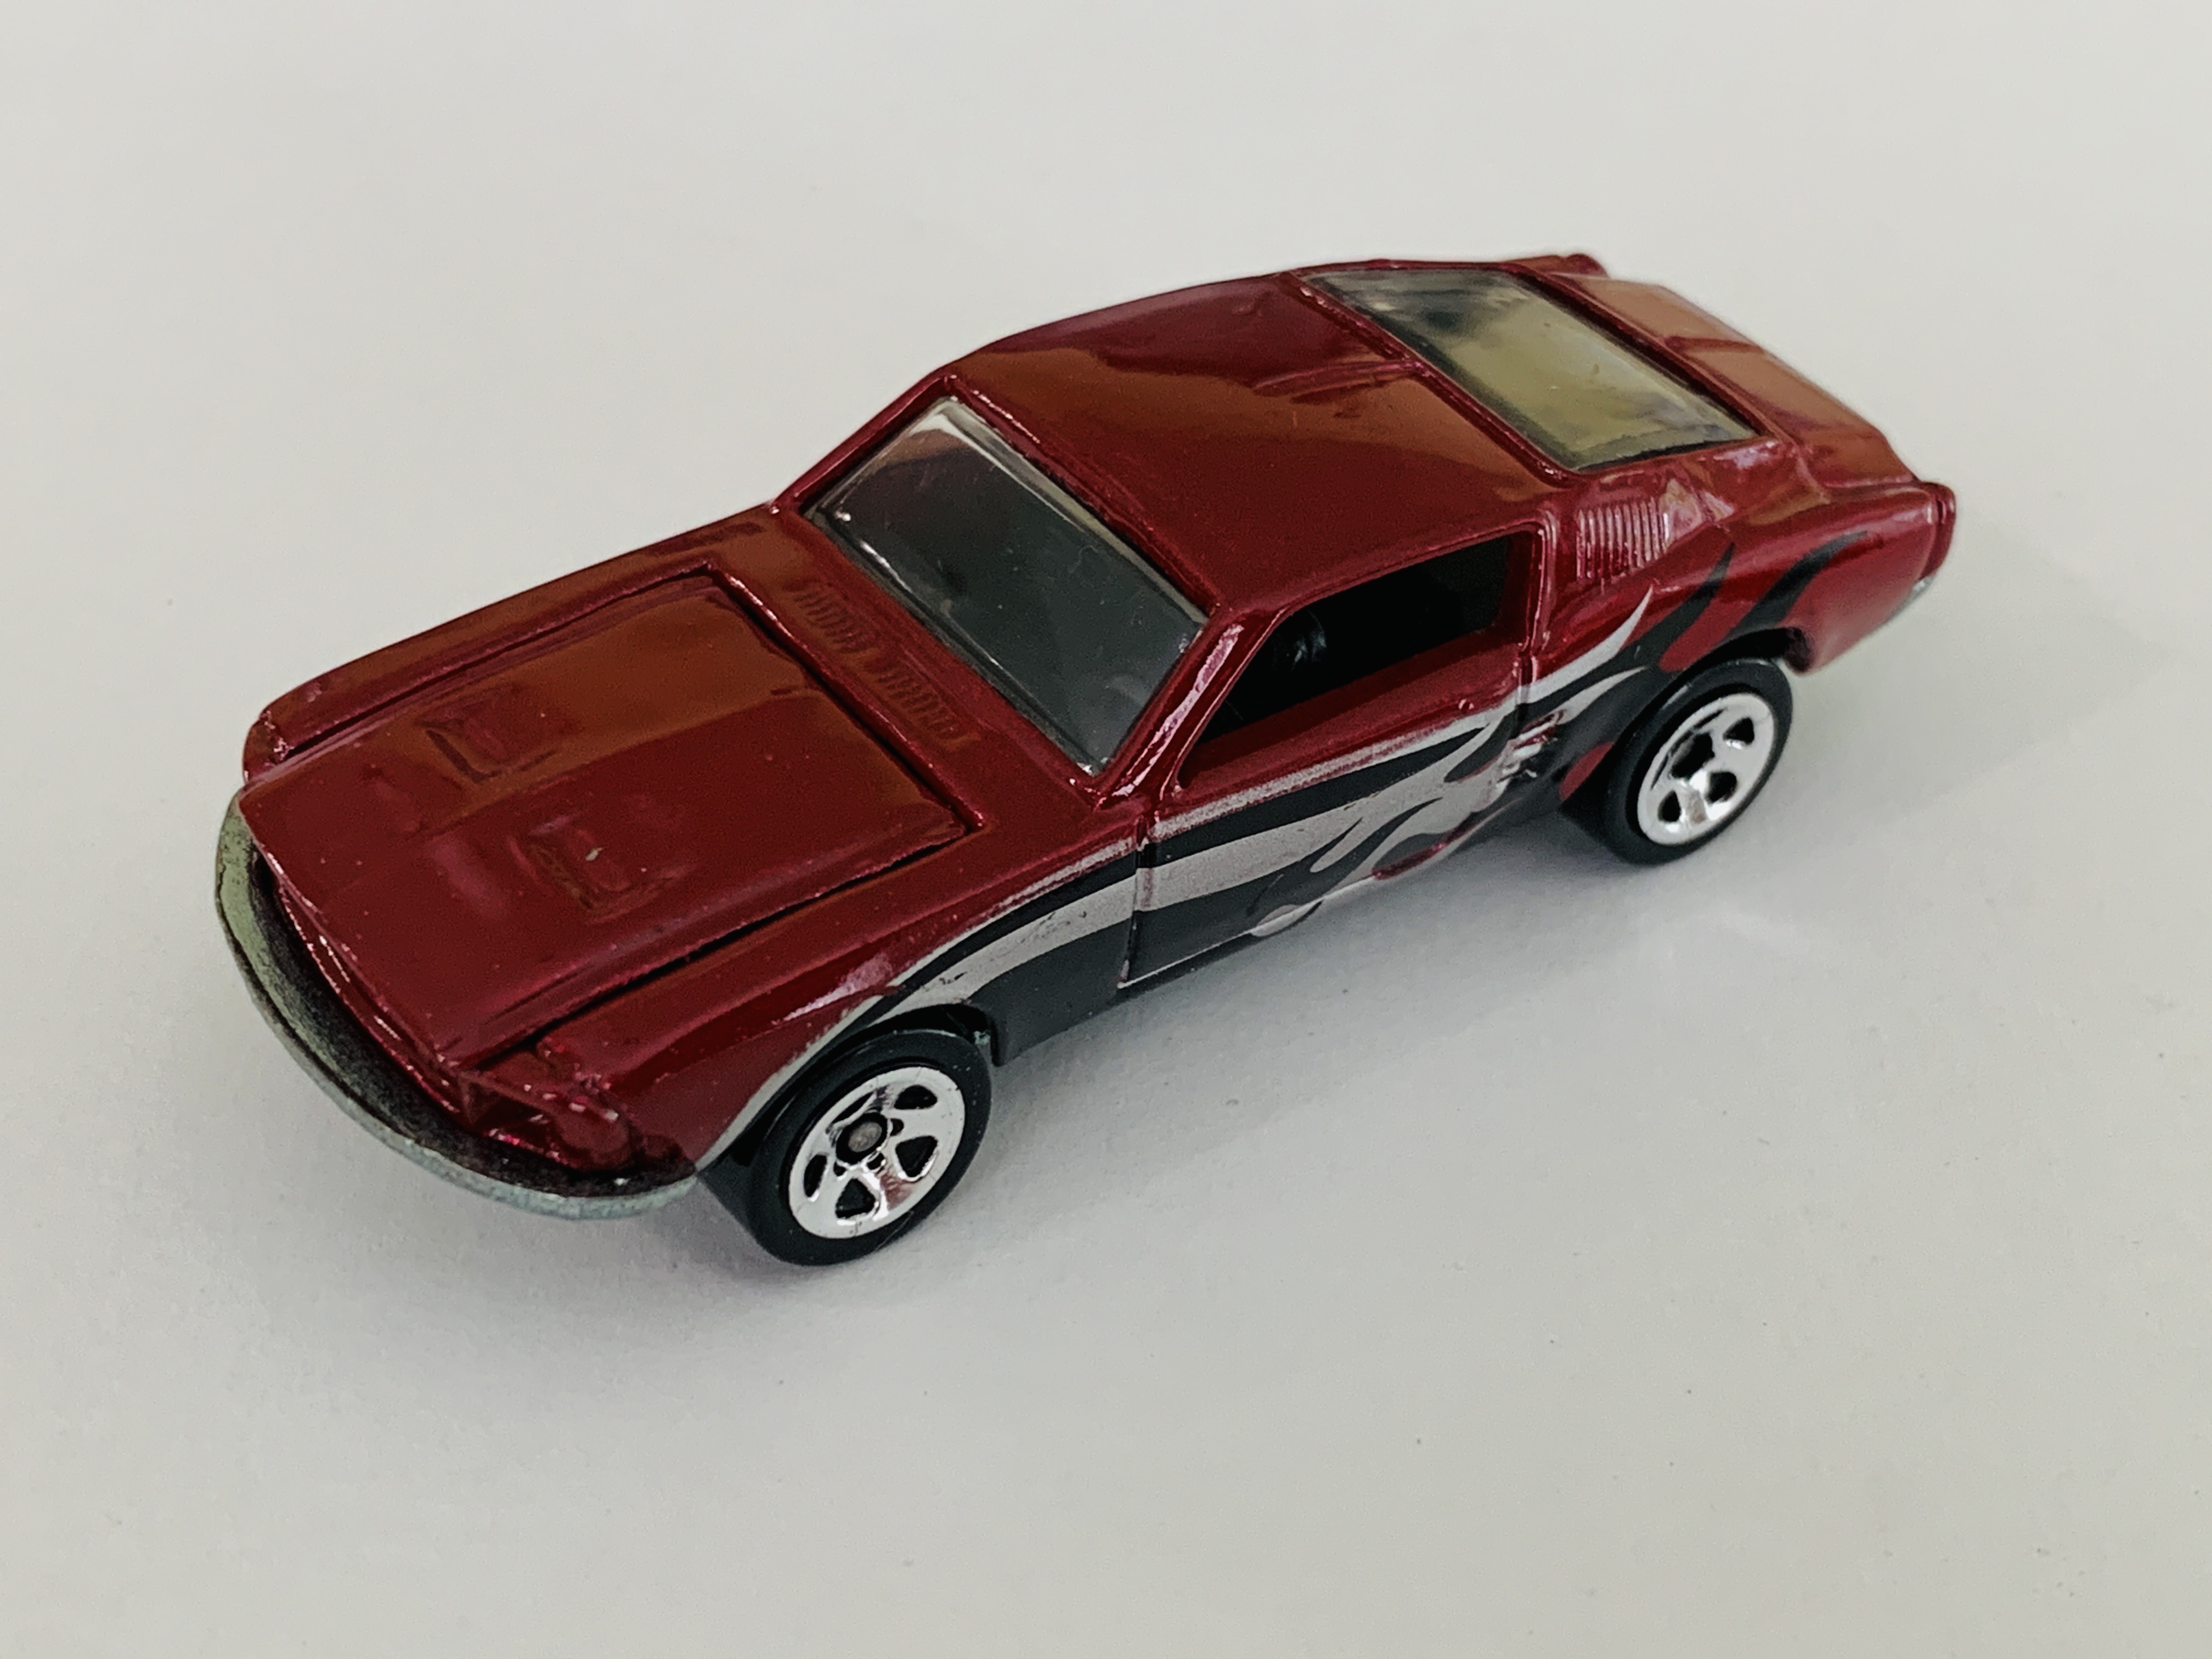 Hot Wheels '67 Mustang From Target Exclusive Set